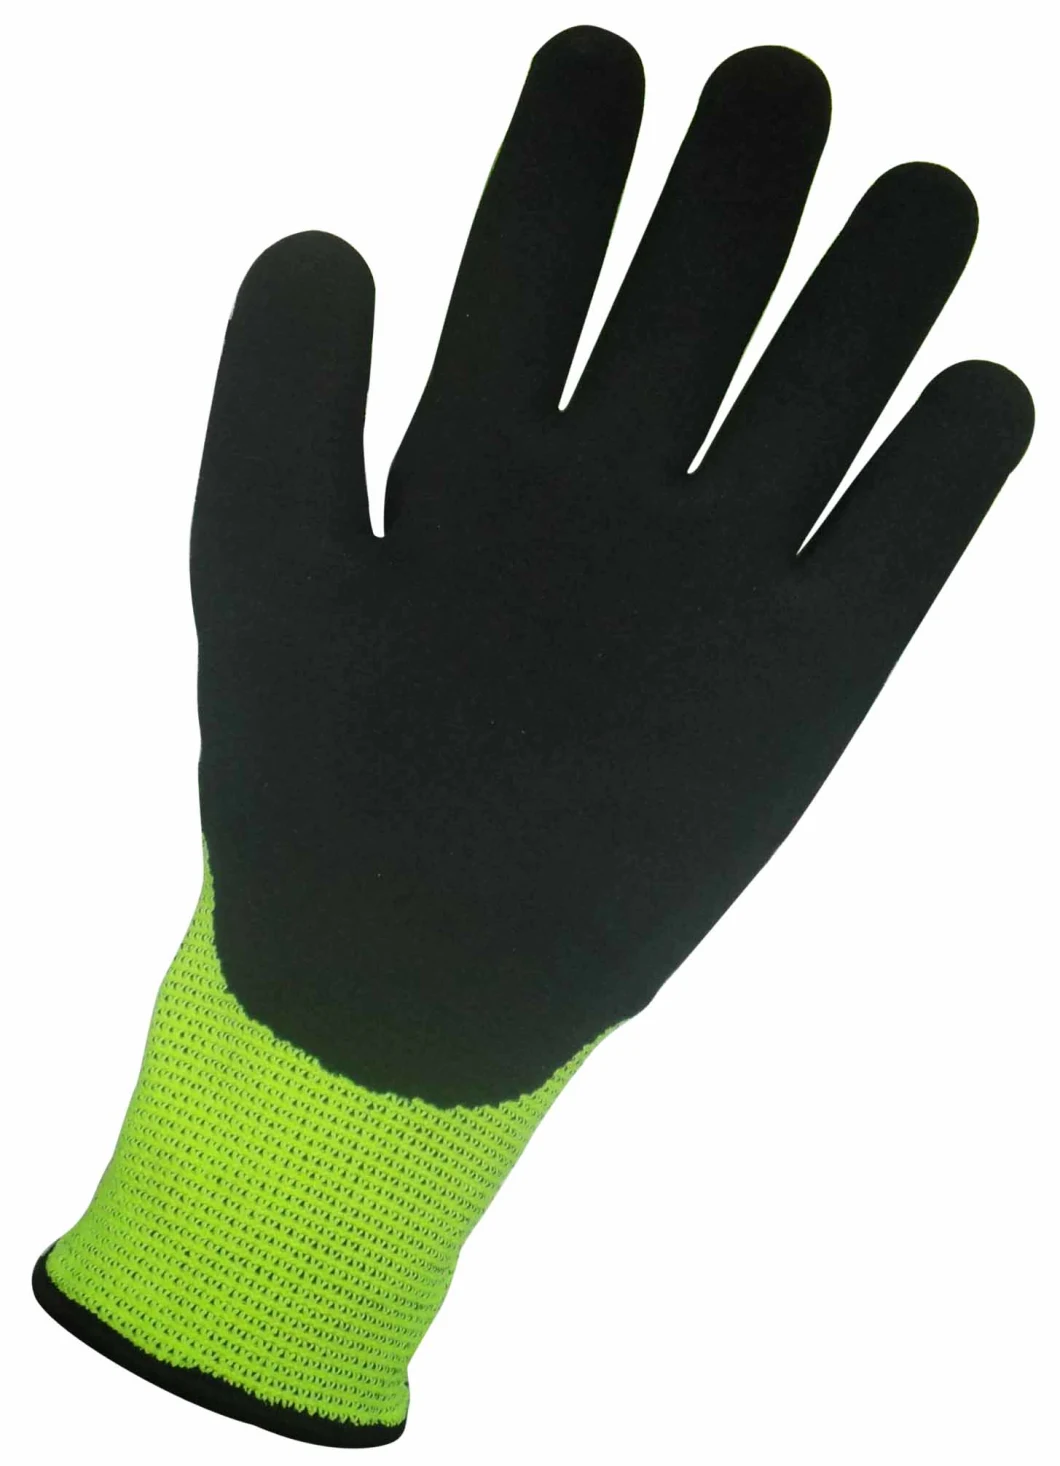 Heavy Duty Anti-Puncture Impact-Resistant Mechanical Safety Work Gloves